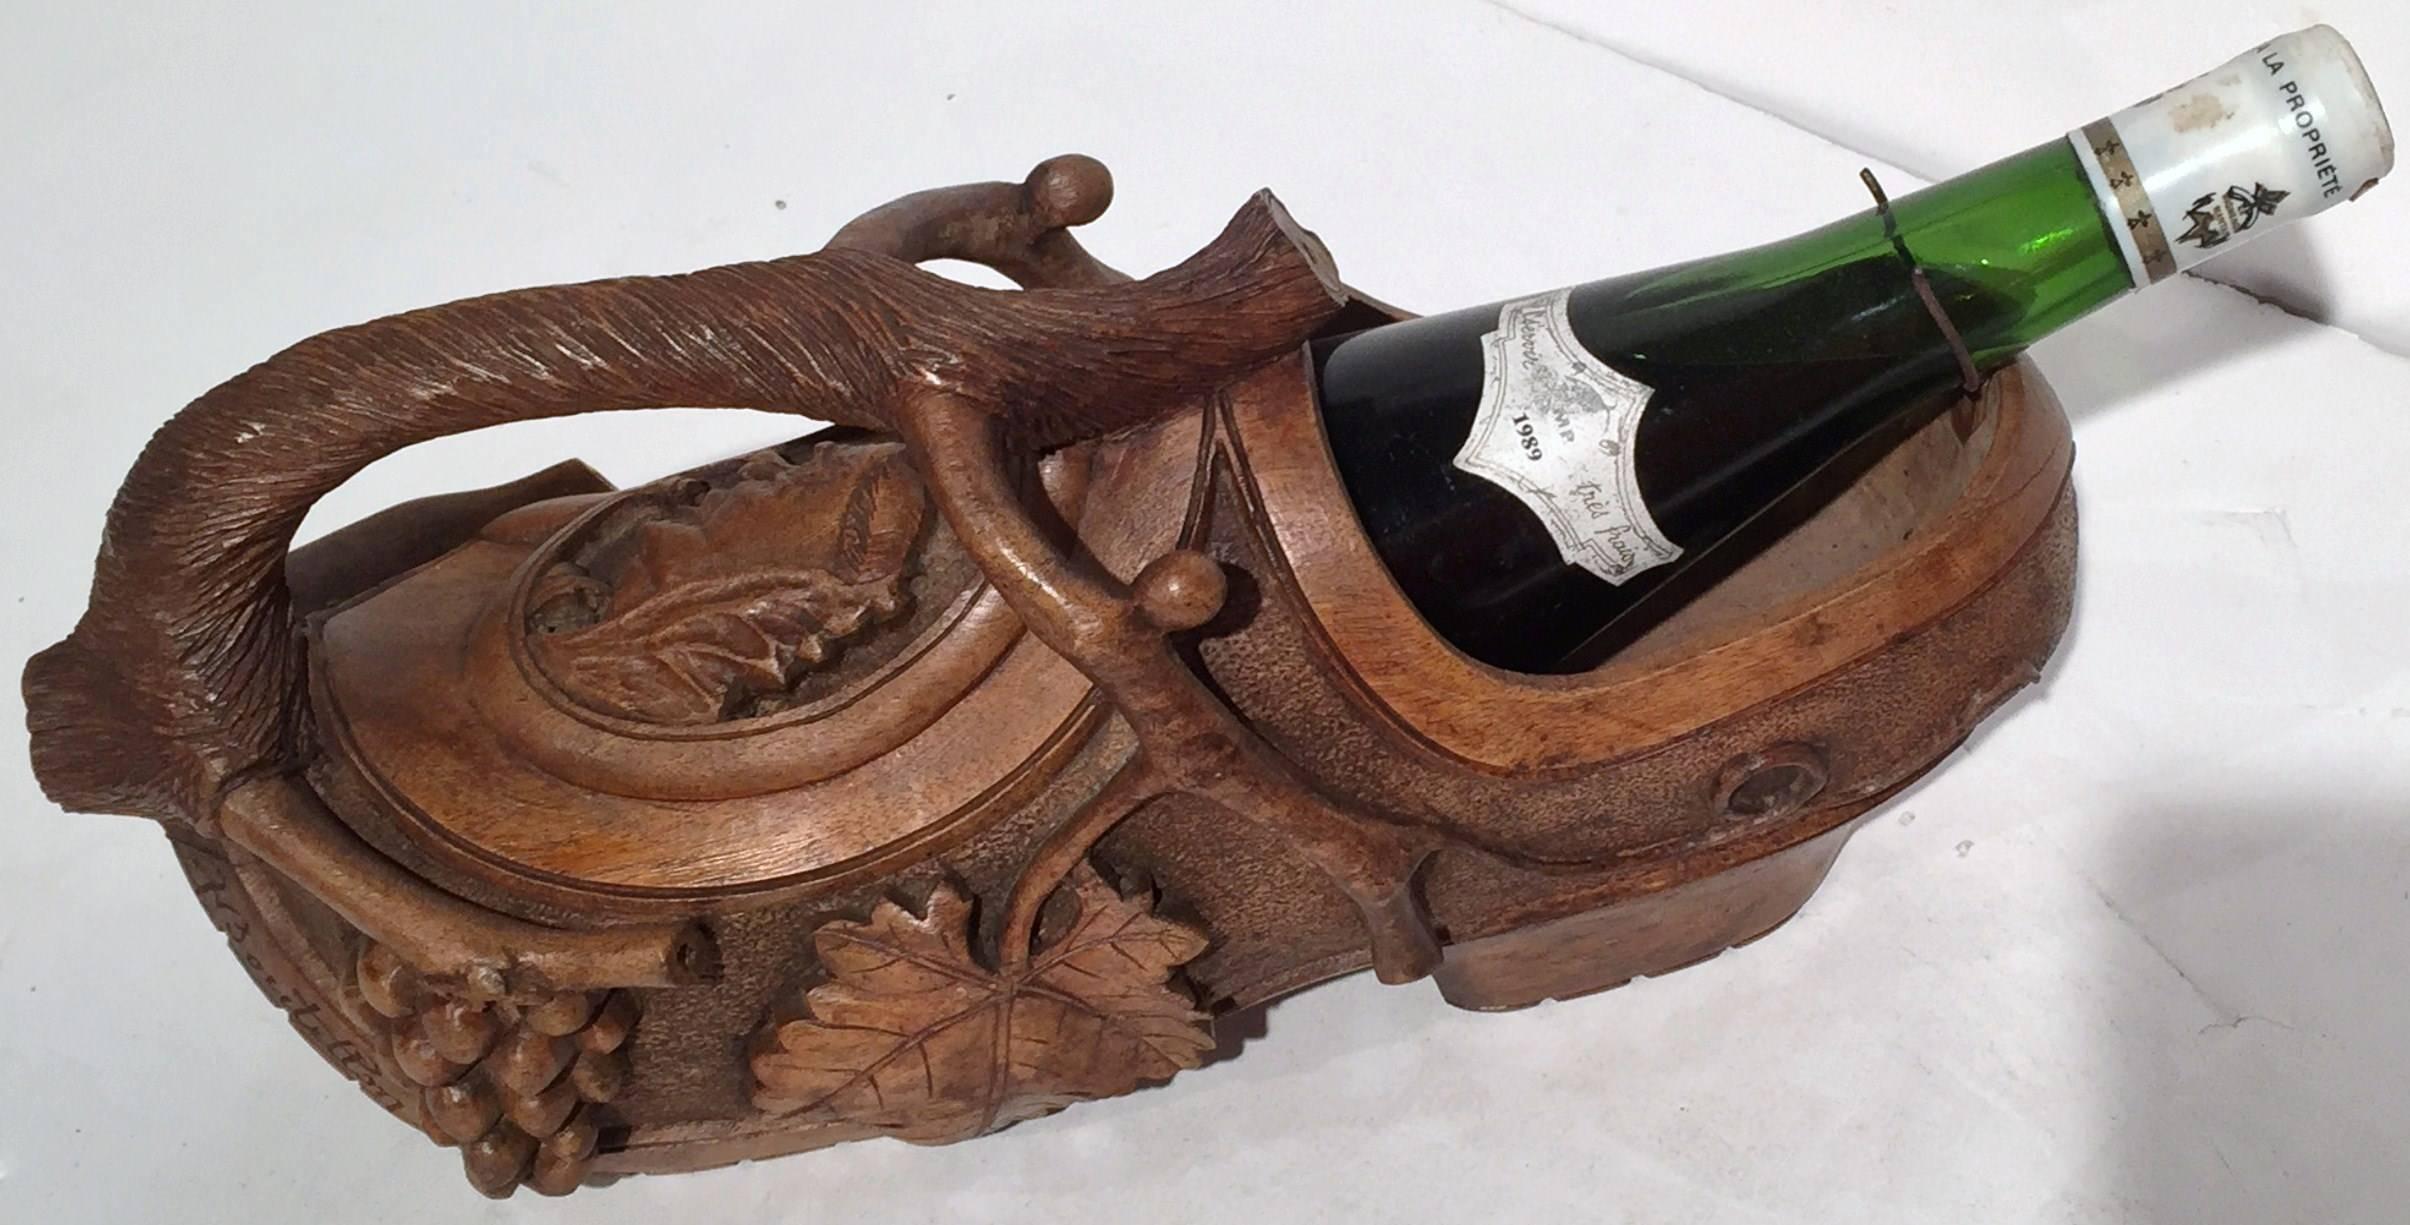 Early 20th Century French Carved Walnut Wine Bottle Holder Clog with Vine Decor In Excellent Condition For Sale In Dallas, TX